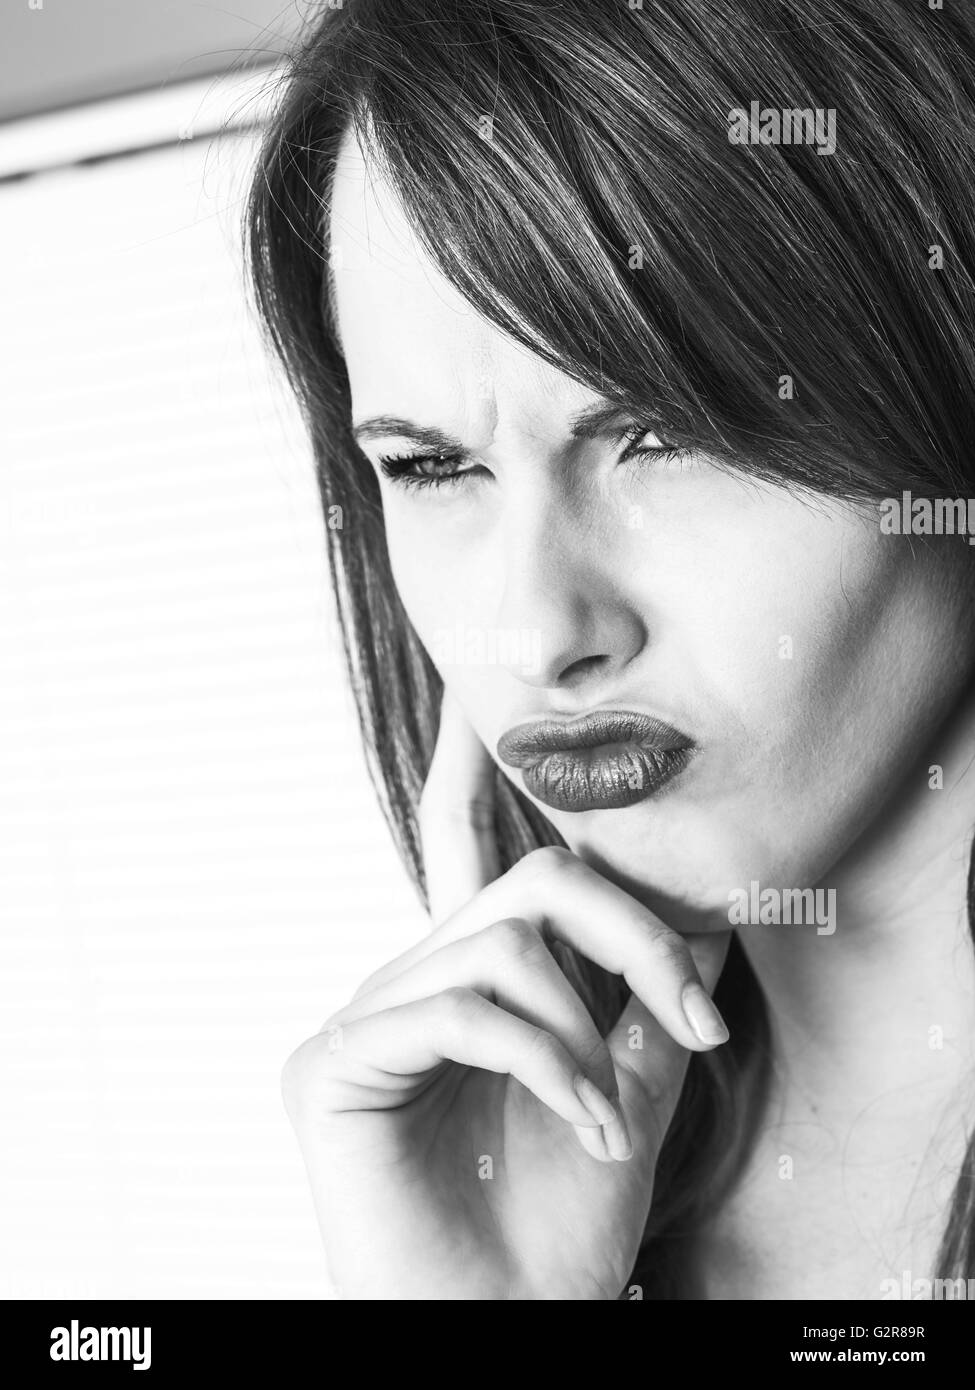 Black and White Portrait of a Frustrated Bored Young Caucasian Woman In Close Up Frowning and Angry Stock Photo